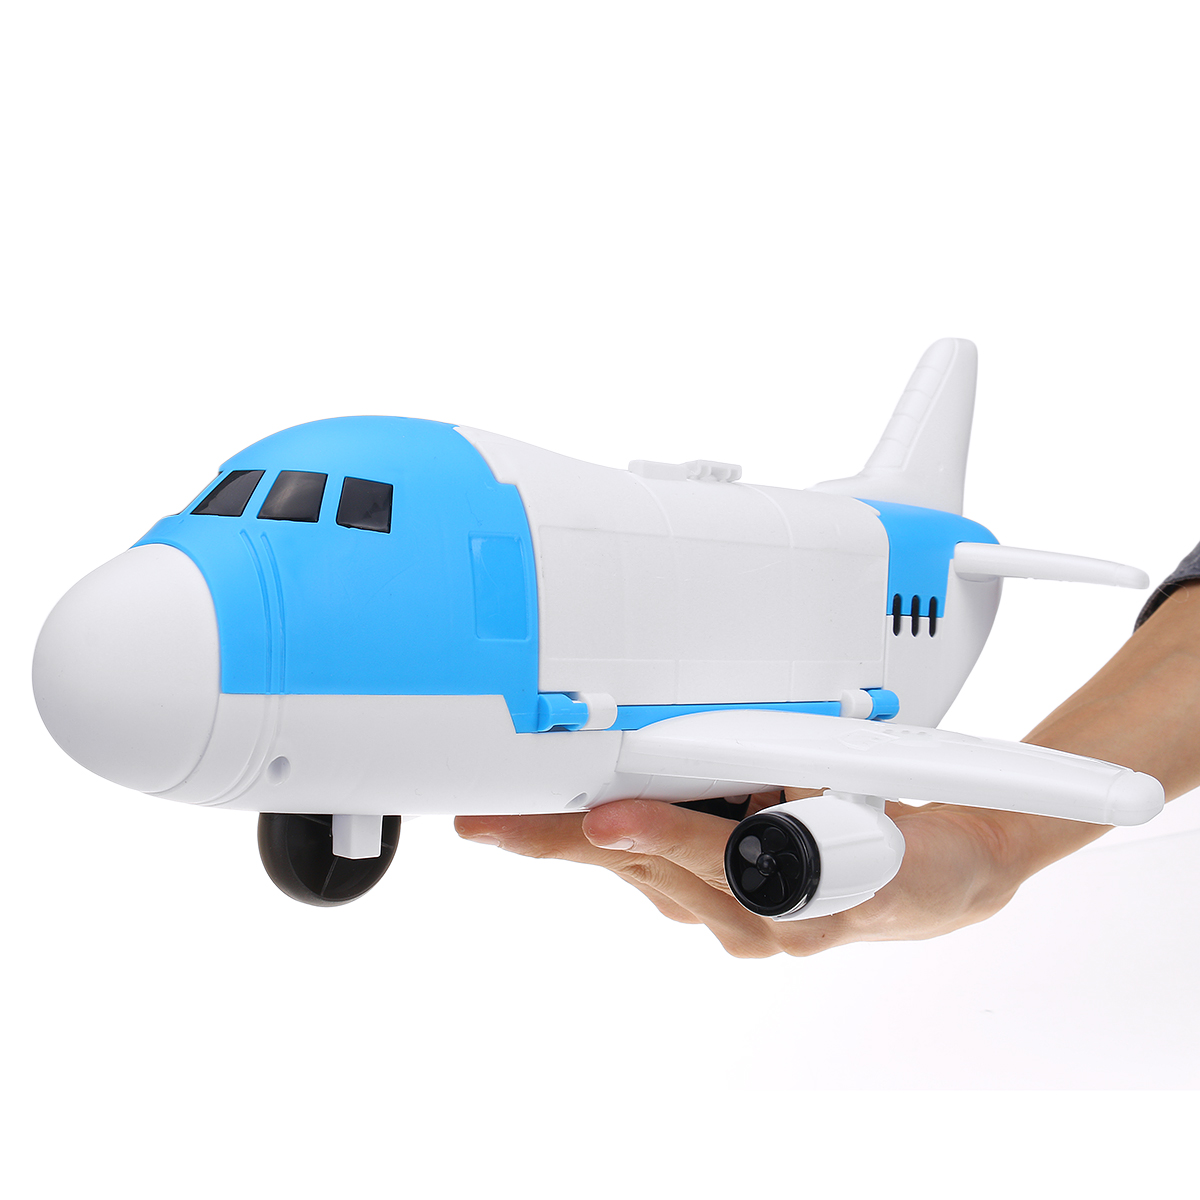 Storage-Transport-Aircraft-Model-Inertia-Diecast-Model-Car-Set-Toy-for-Childrens-Gift-1621631-4